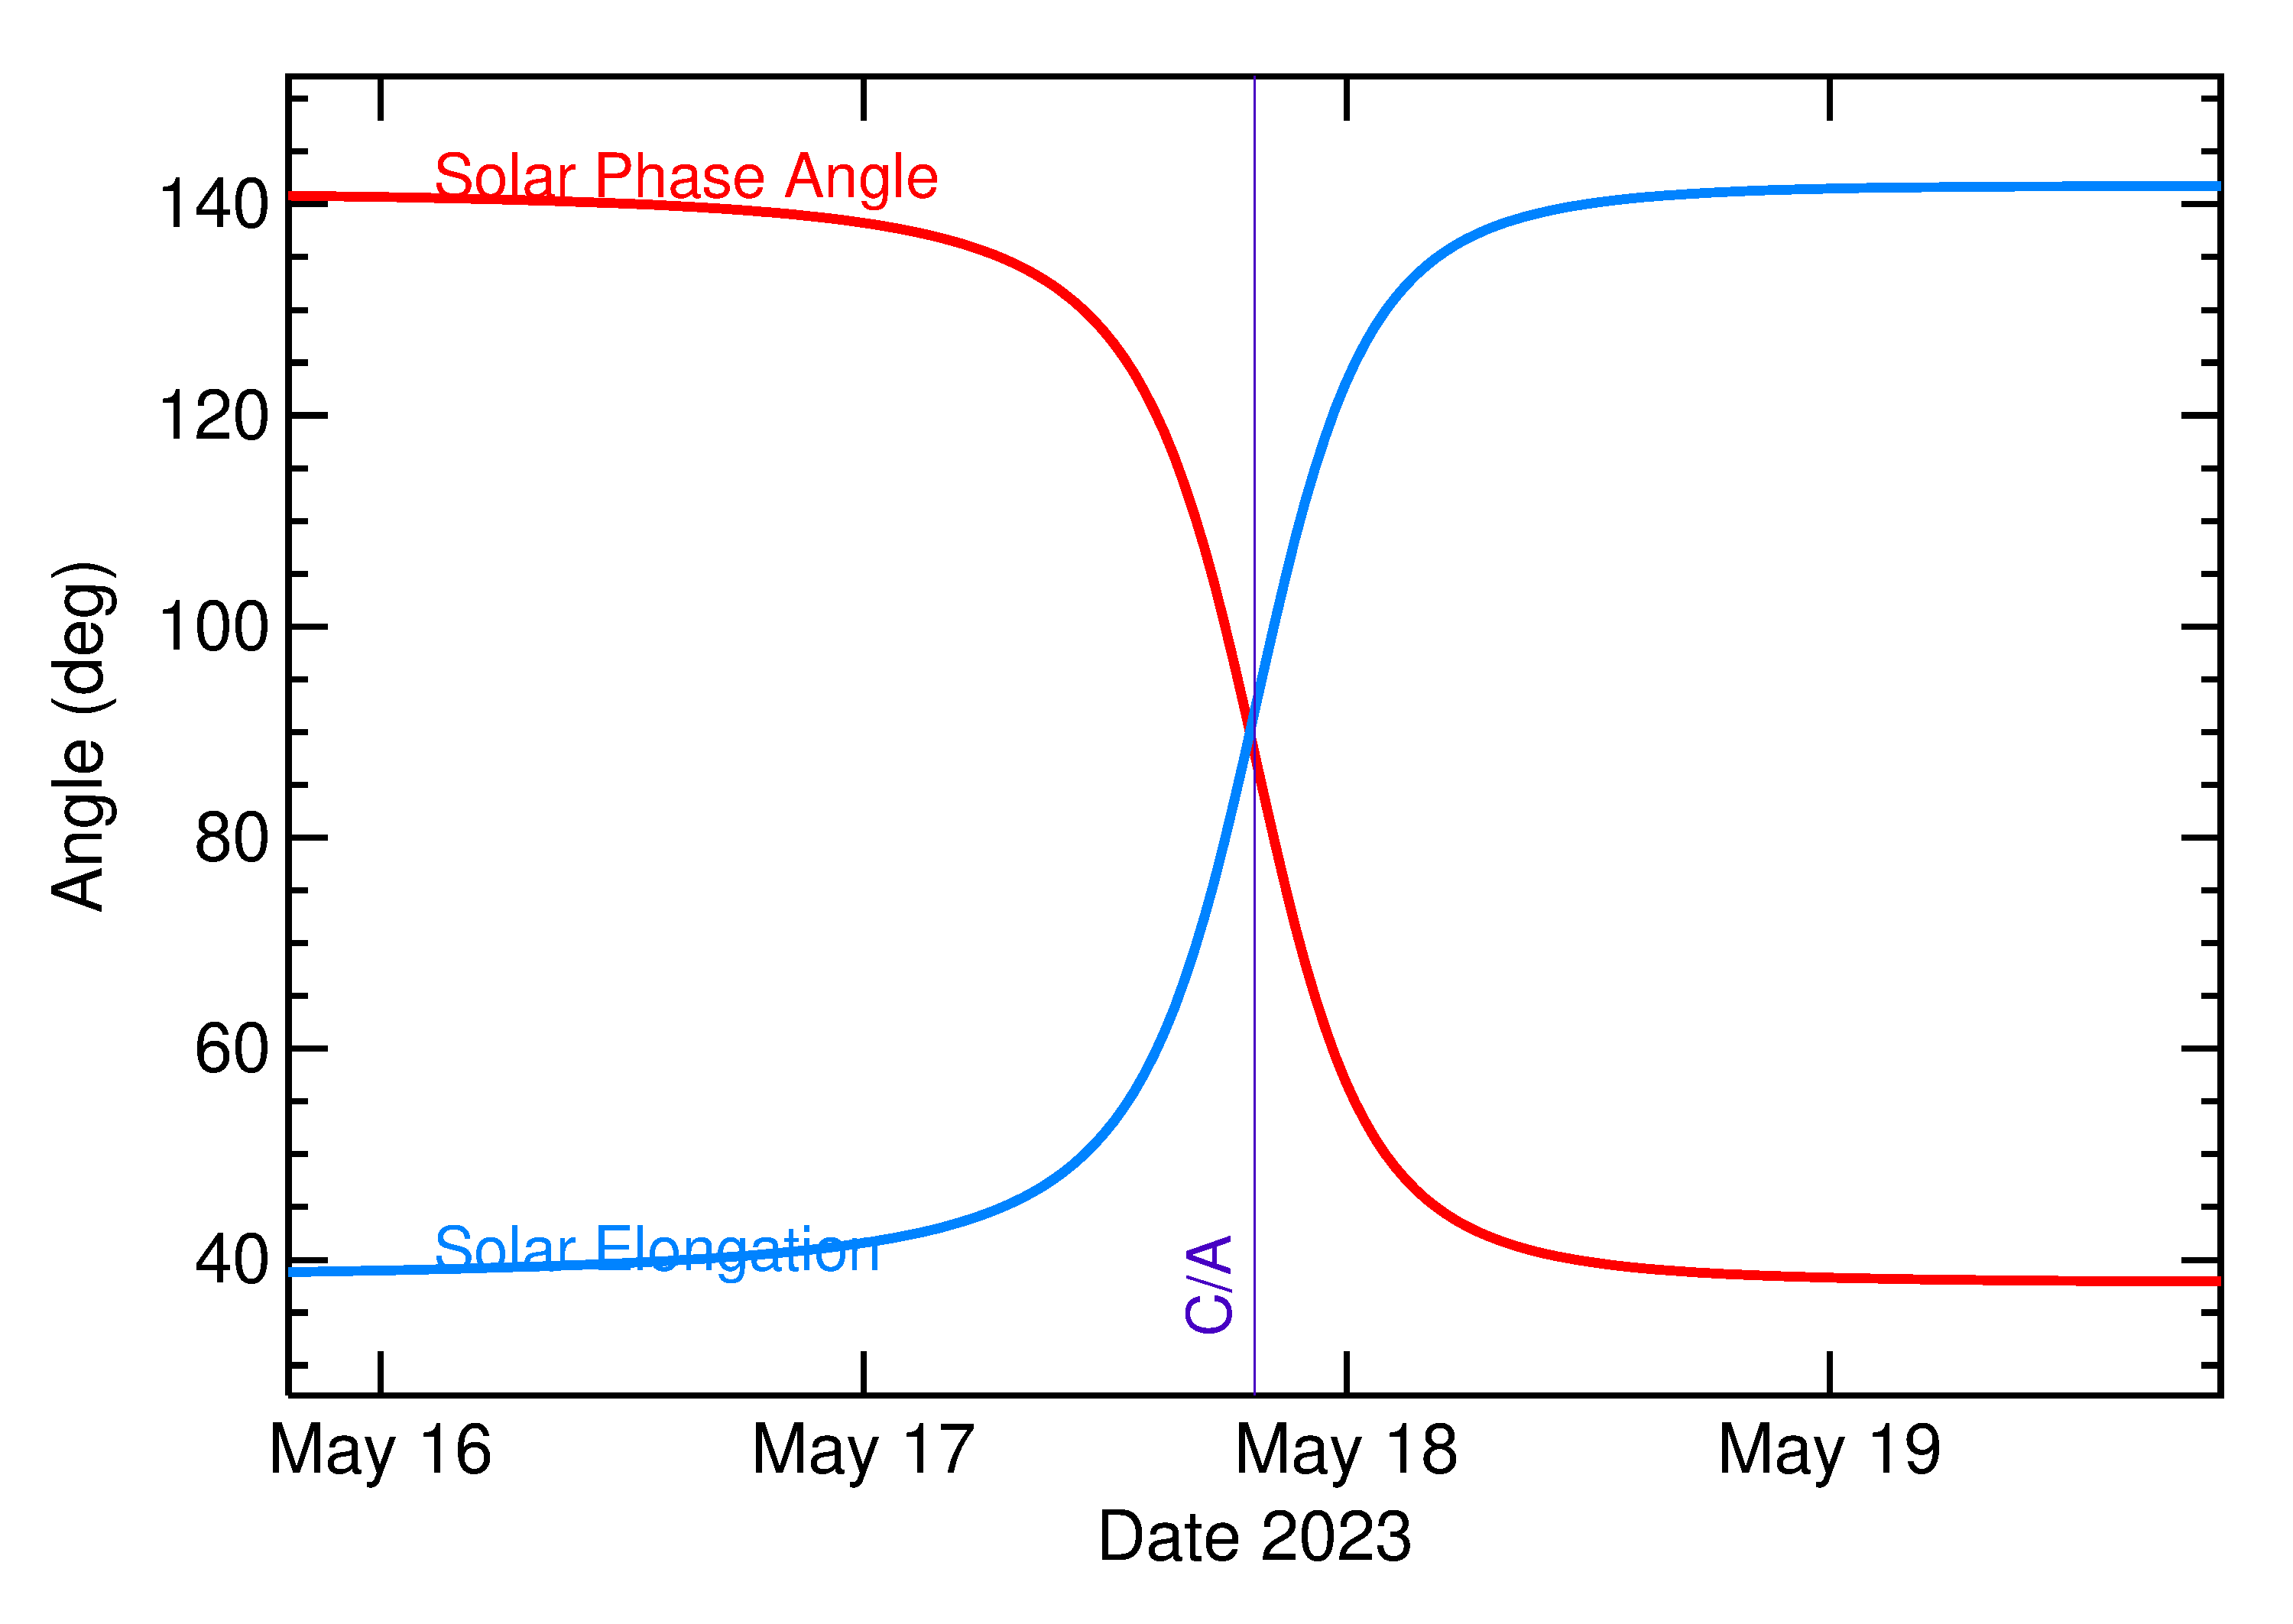 Solar Elongation and Solar Phase Angle of 2023 KT in the days around closest approach